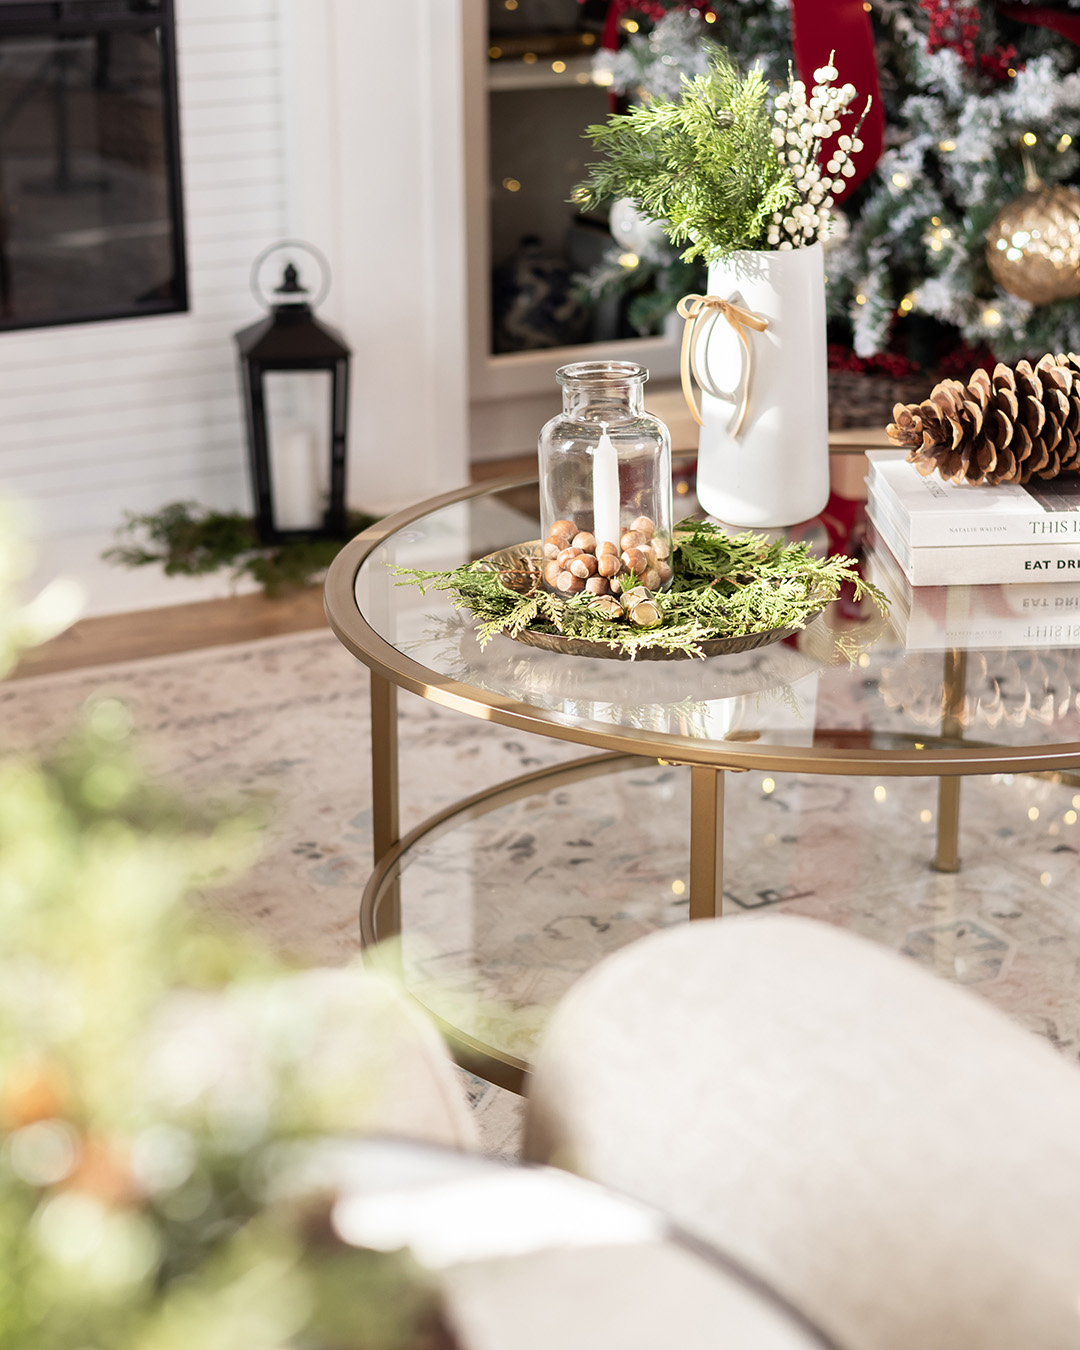 A peaceful Christmas coffee table with greenery and pinecones.